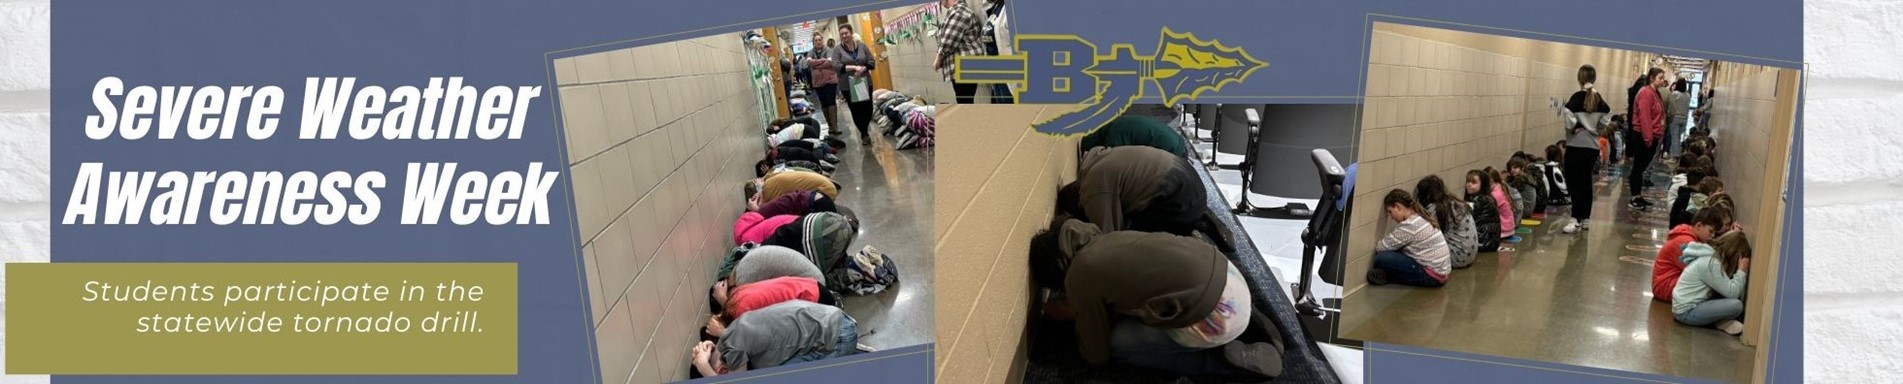 Students participate in the statewide tornado drill